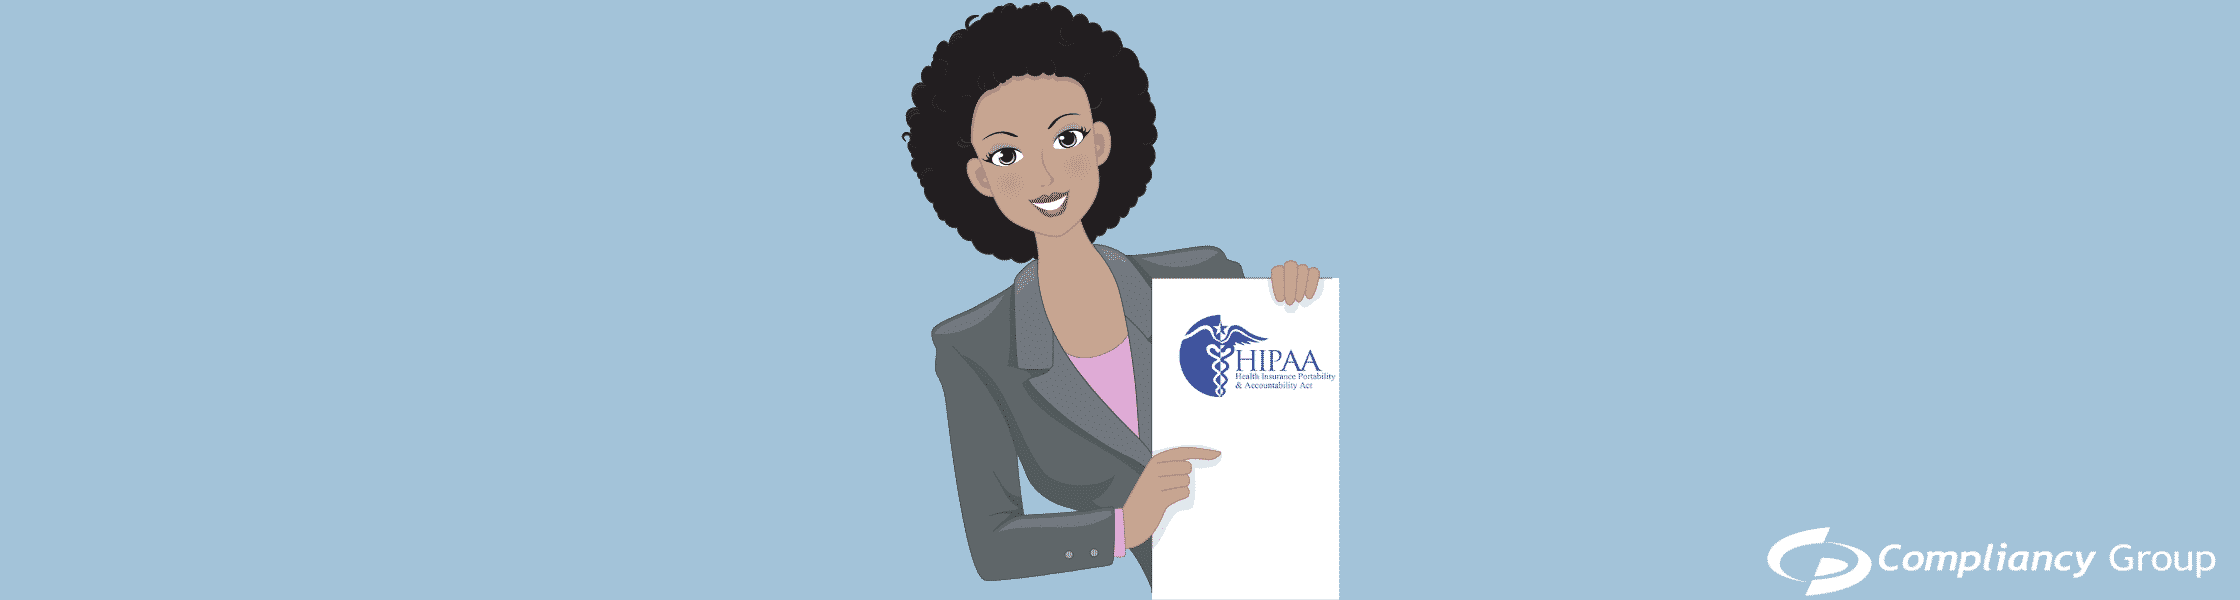 HIPAA compliance officer and IT specialist